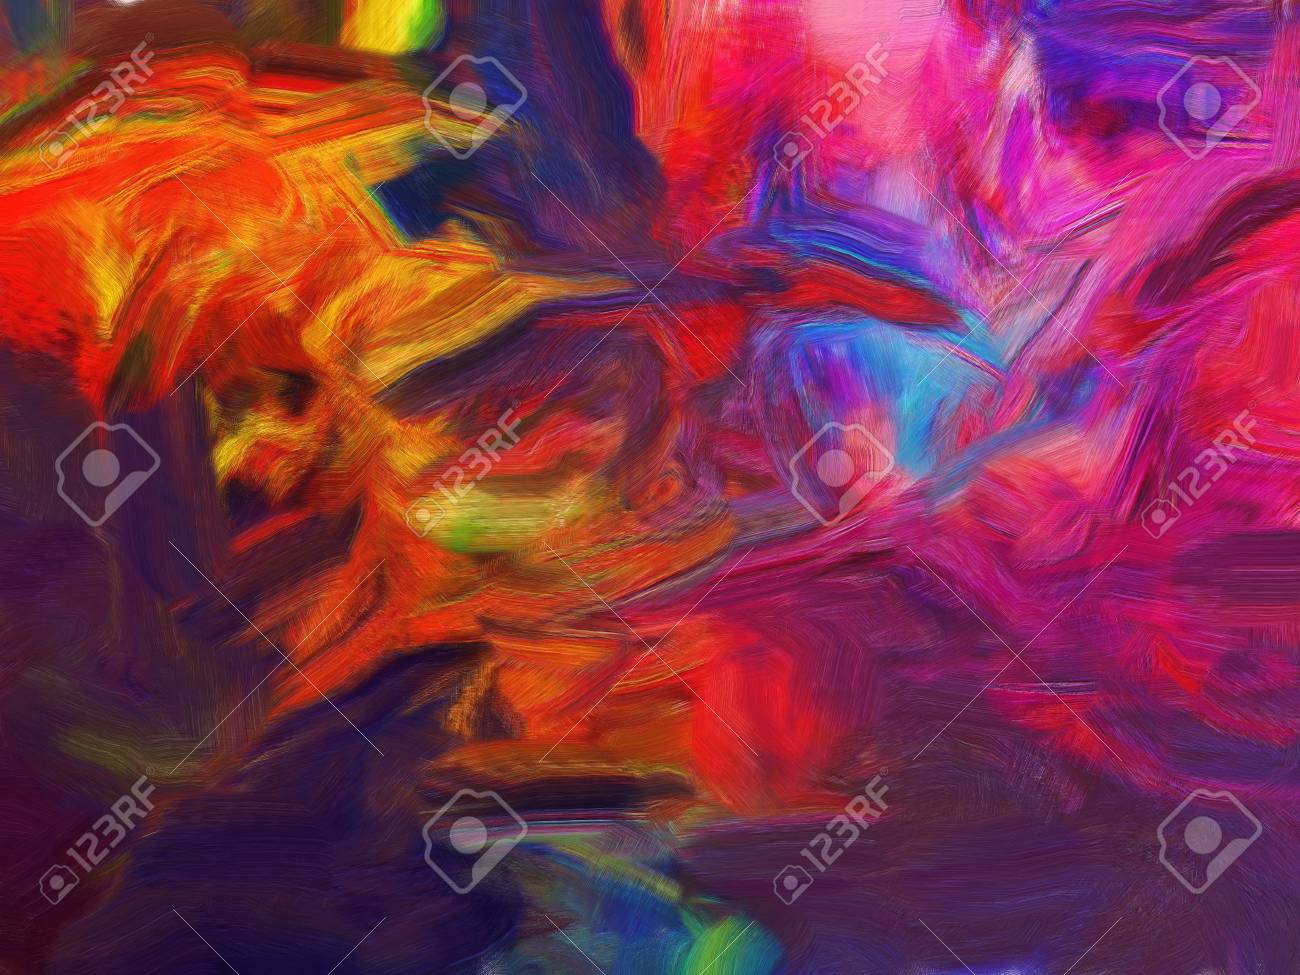 Abstract Texture Background Art Wallpaper Colorful Digital